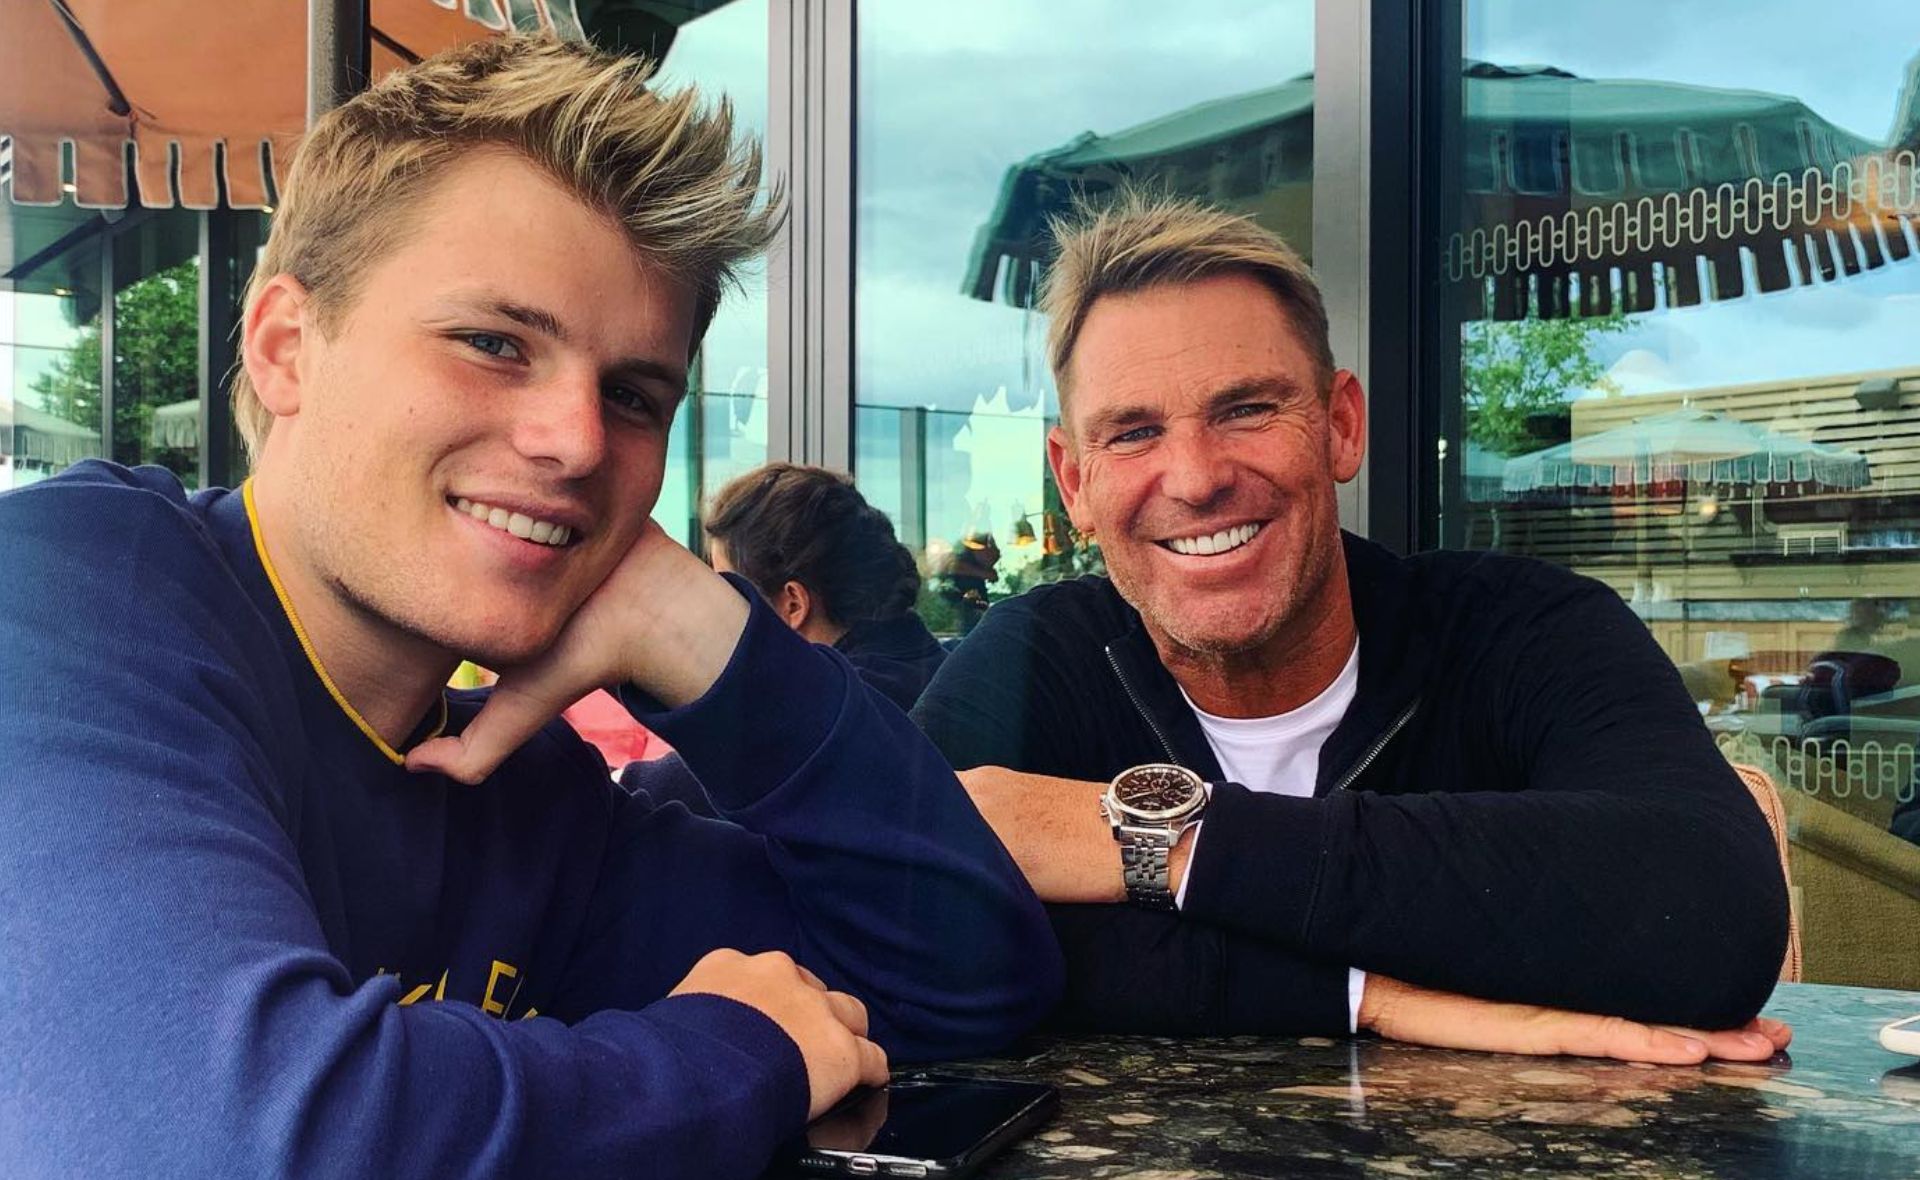 Jackson Warne shares his pride after his late father, Shane Warne, received a posthumous Queen’s Birthday honour